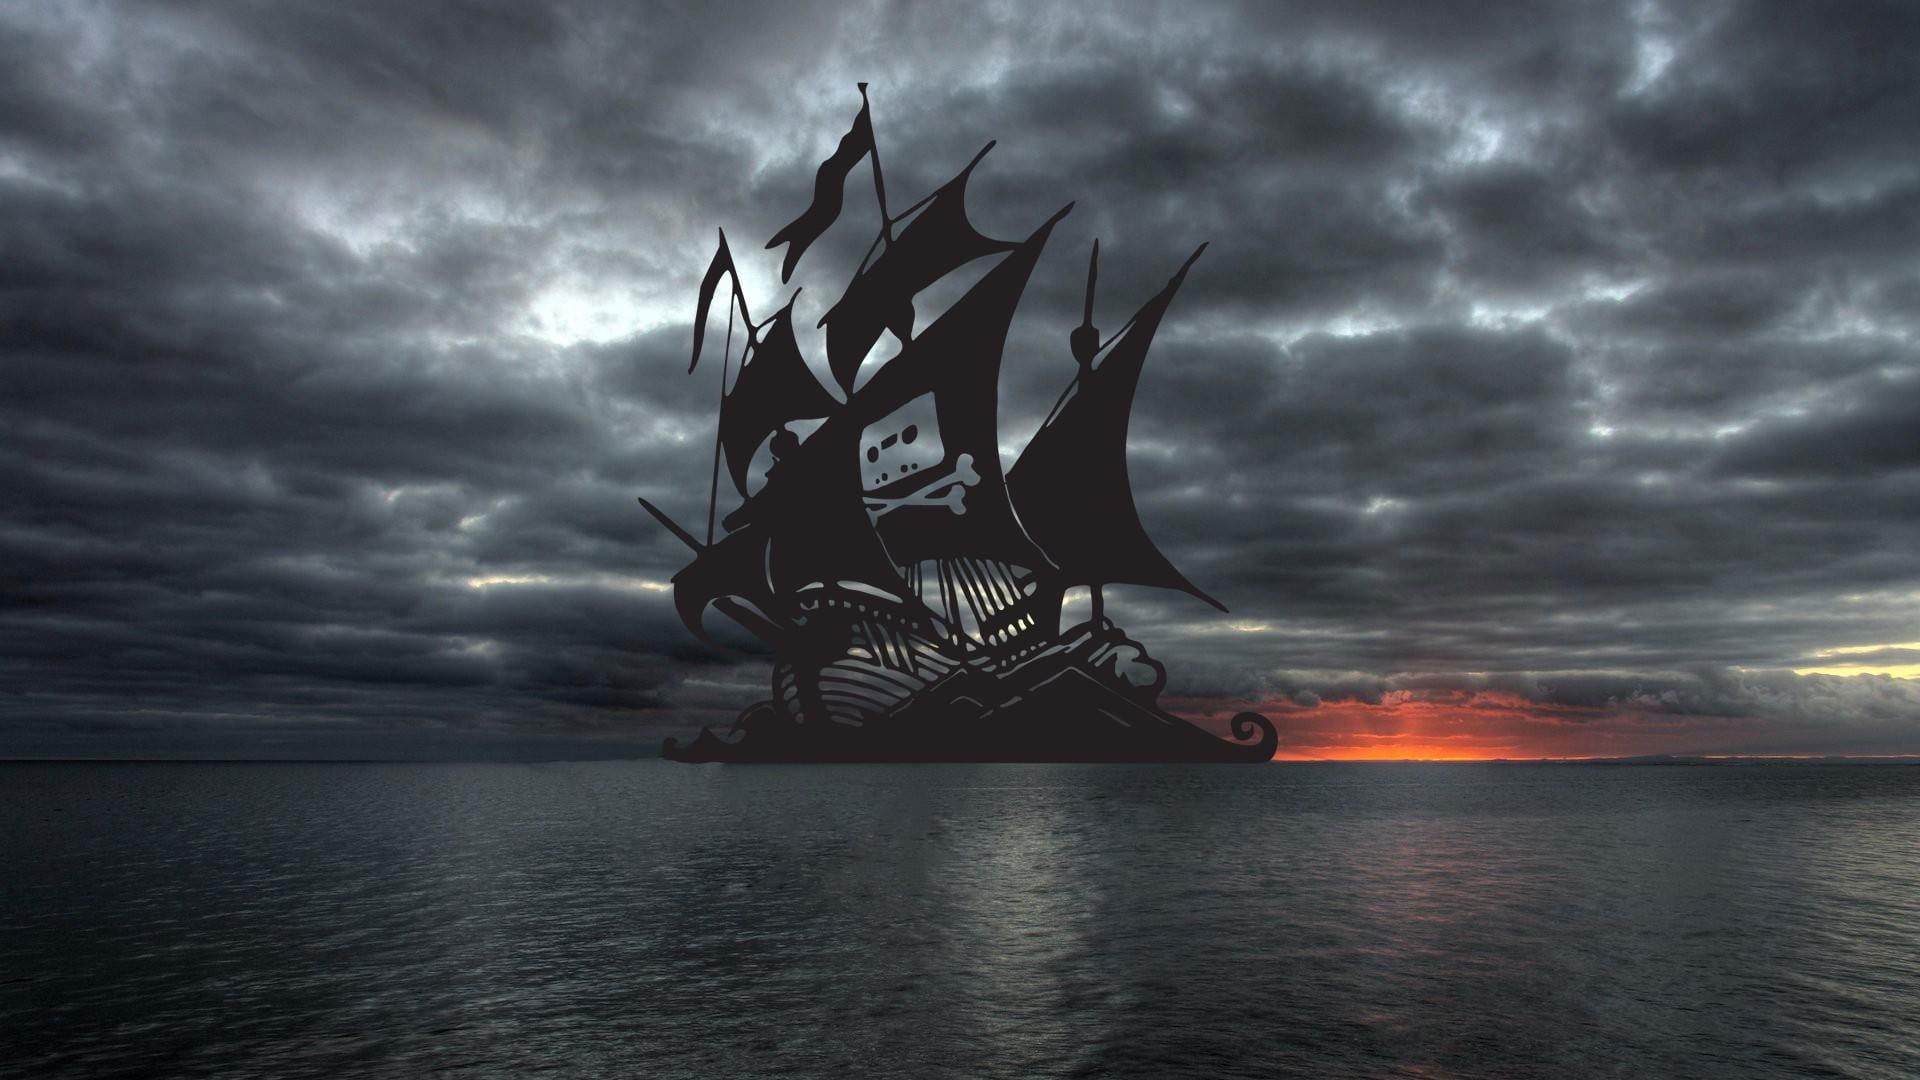 Pirate Ship Vector Wallpaper, The Pirate Bay, Cloud, Water, Sea, Storm